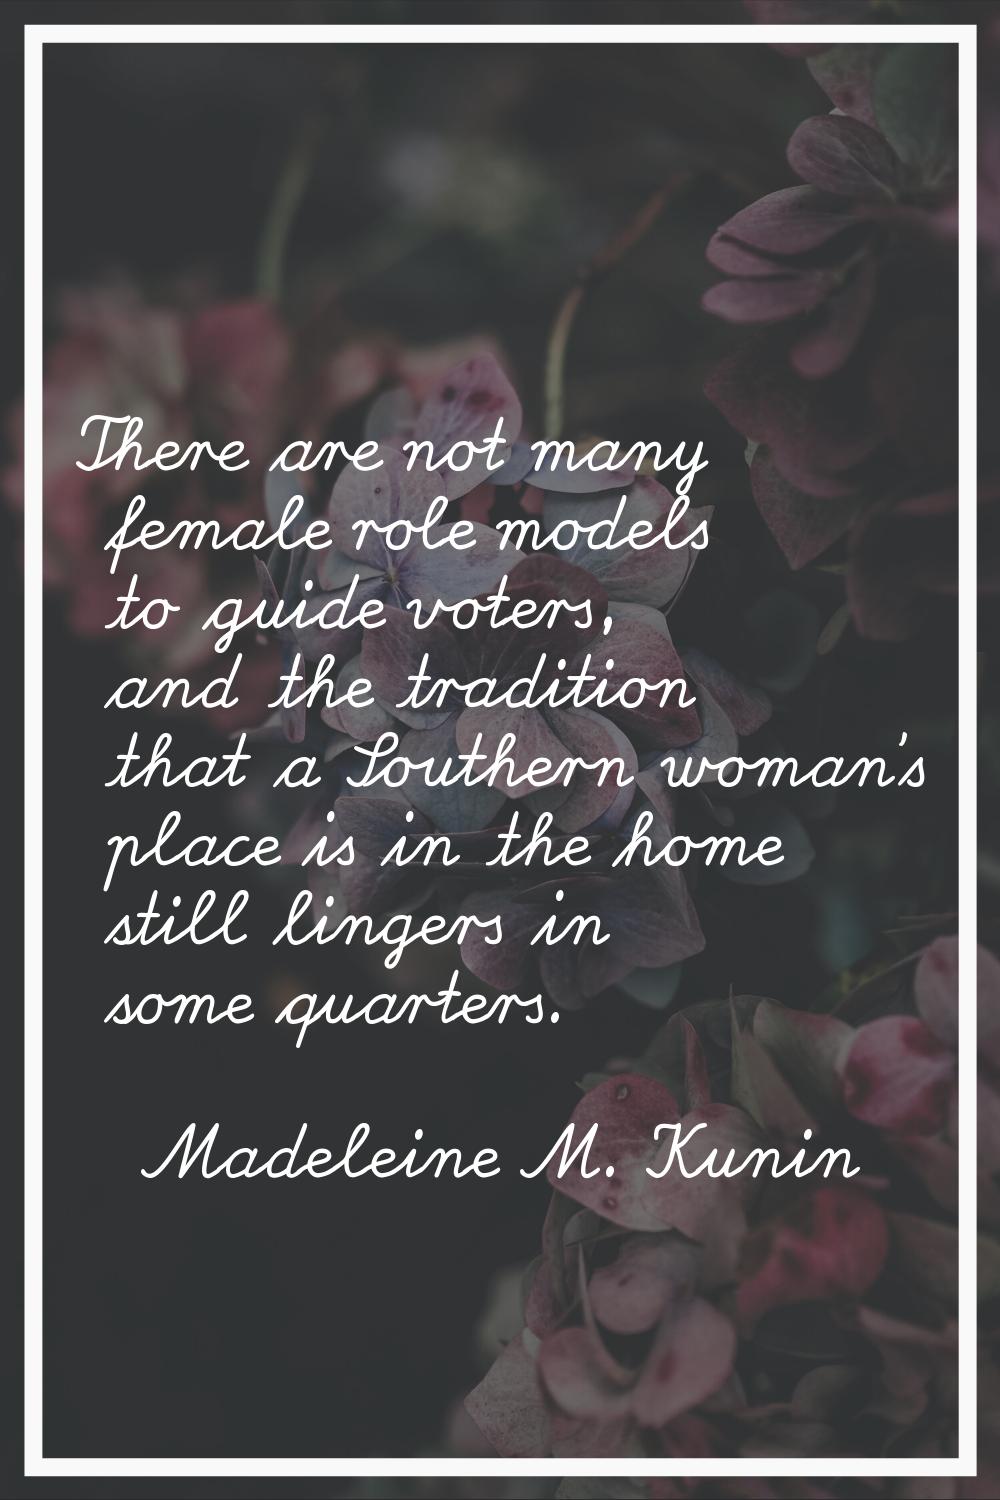 There are not many female role models to guide voters, and the tradition that a Southern woman's pl